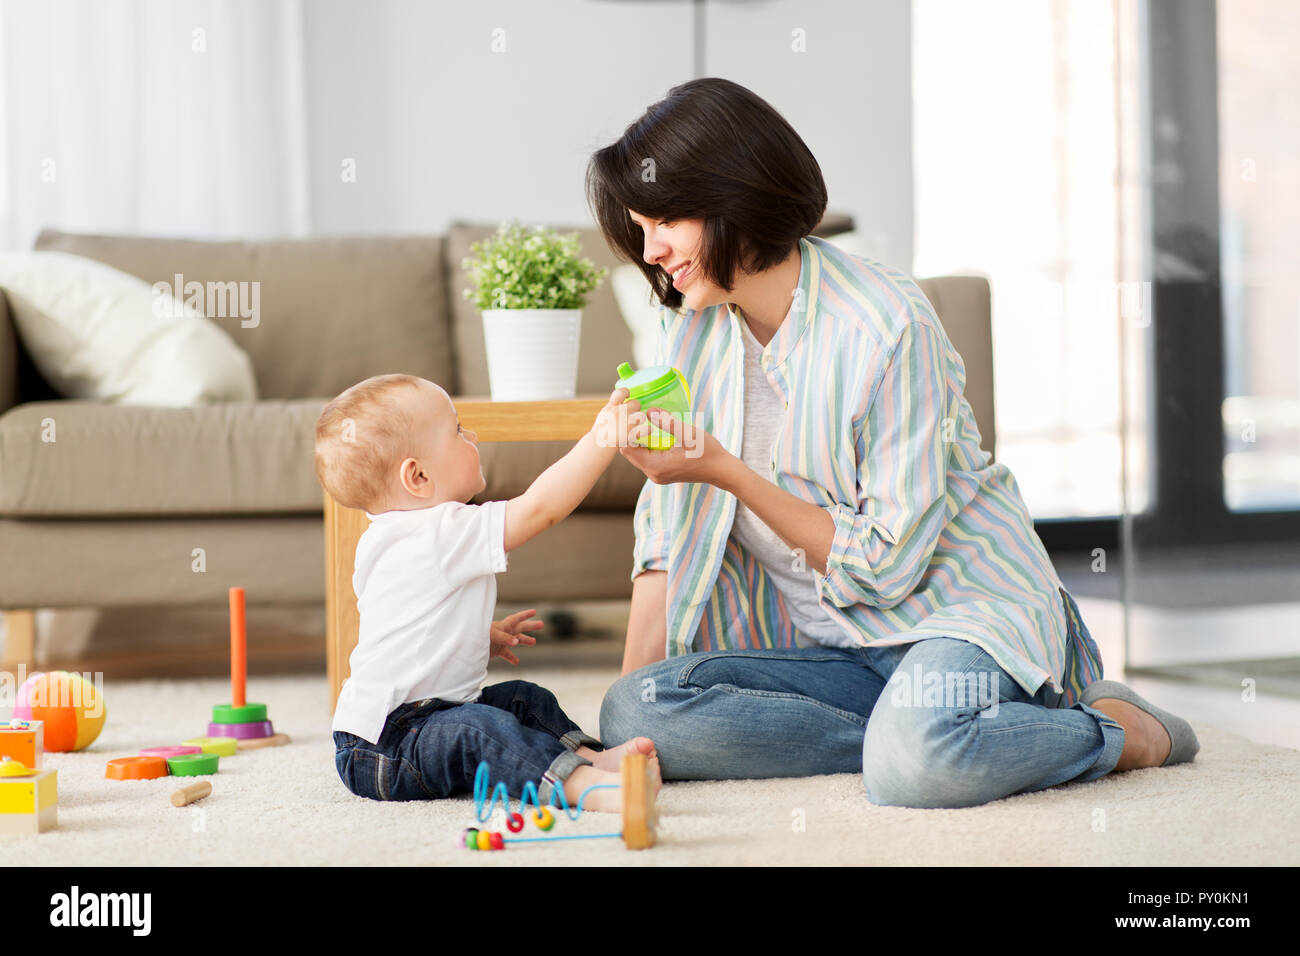 https://c8.alamy.com/comp/PY0KN1/happy-mother-giving-sippy-cup-to-baby-son-at-home-PY0KN1.jpg